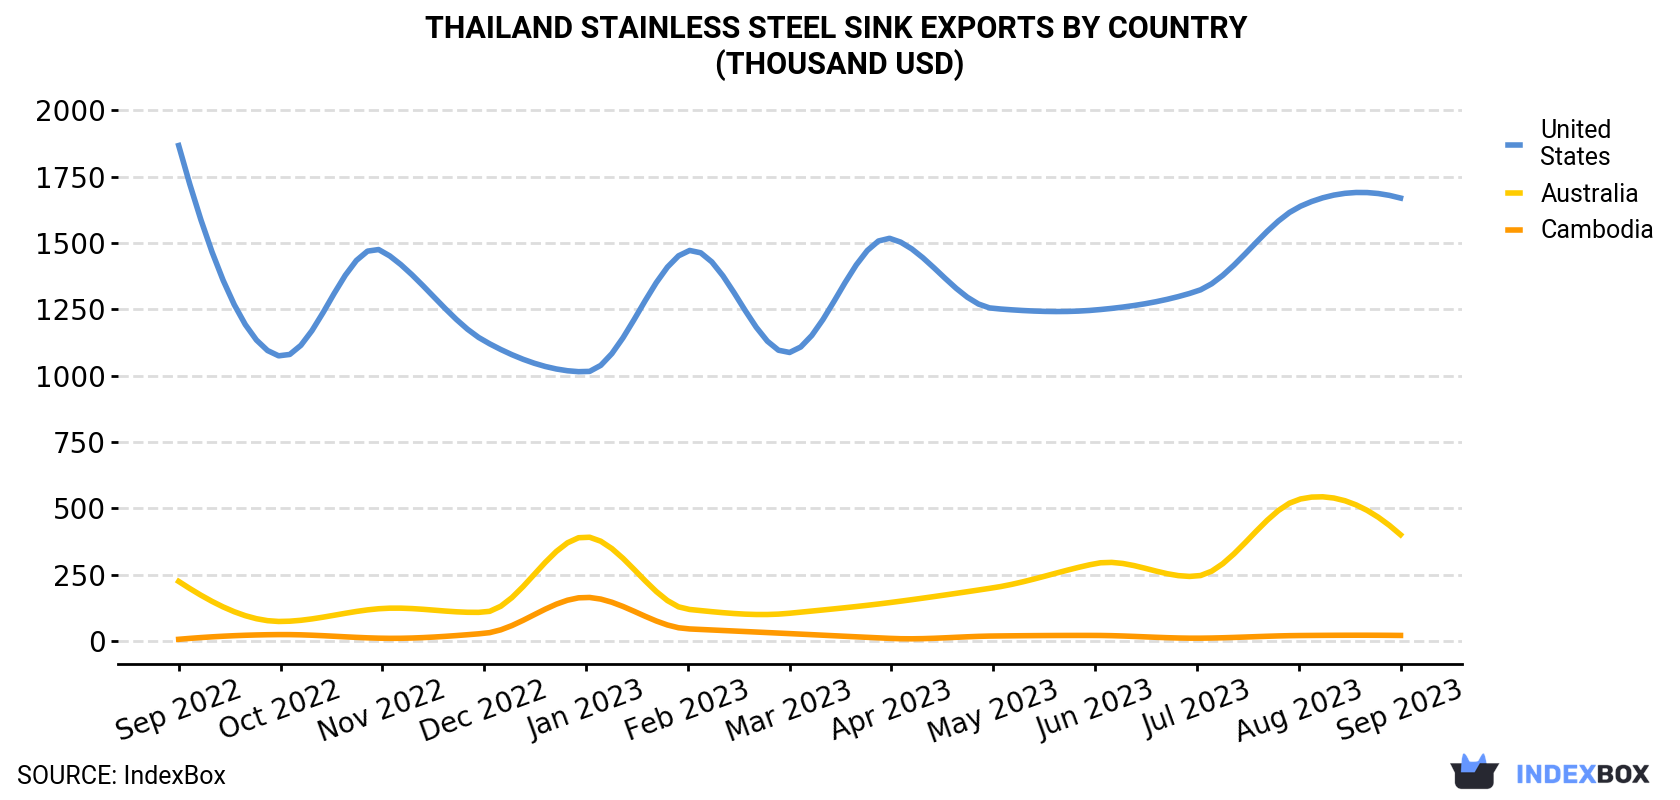 Thailand Stainless Steel Sink Exports By Country (Thousand USD)